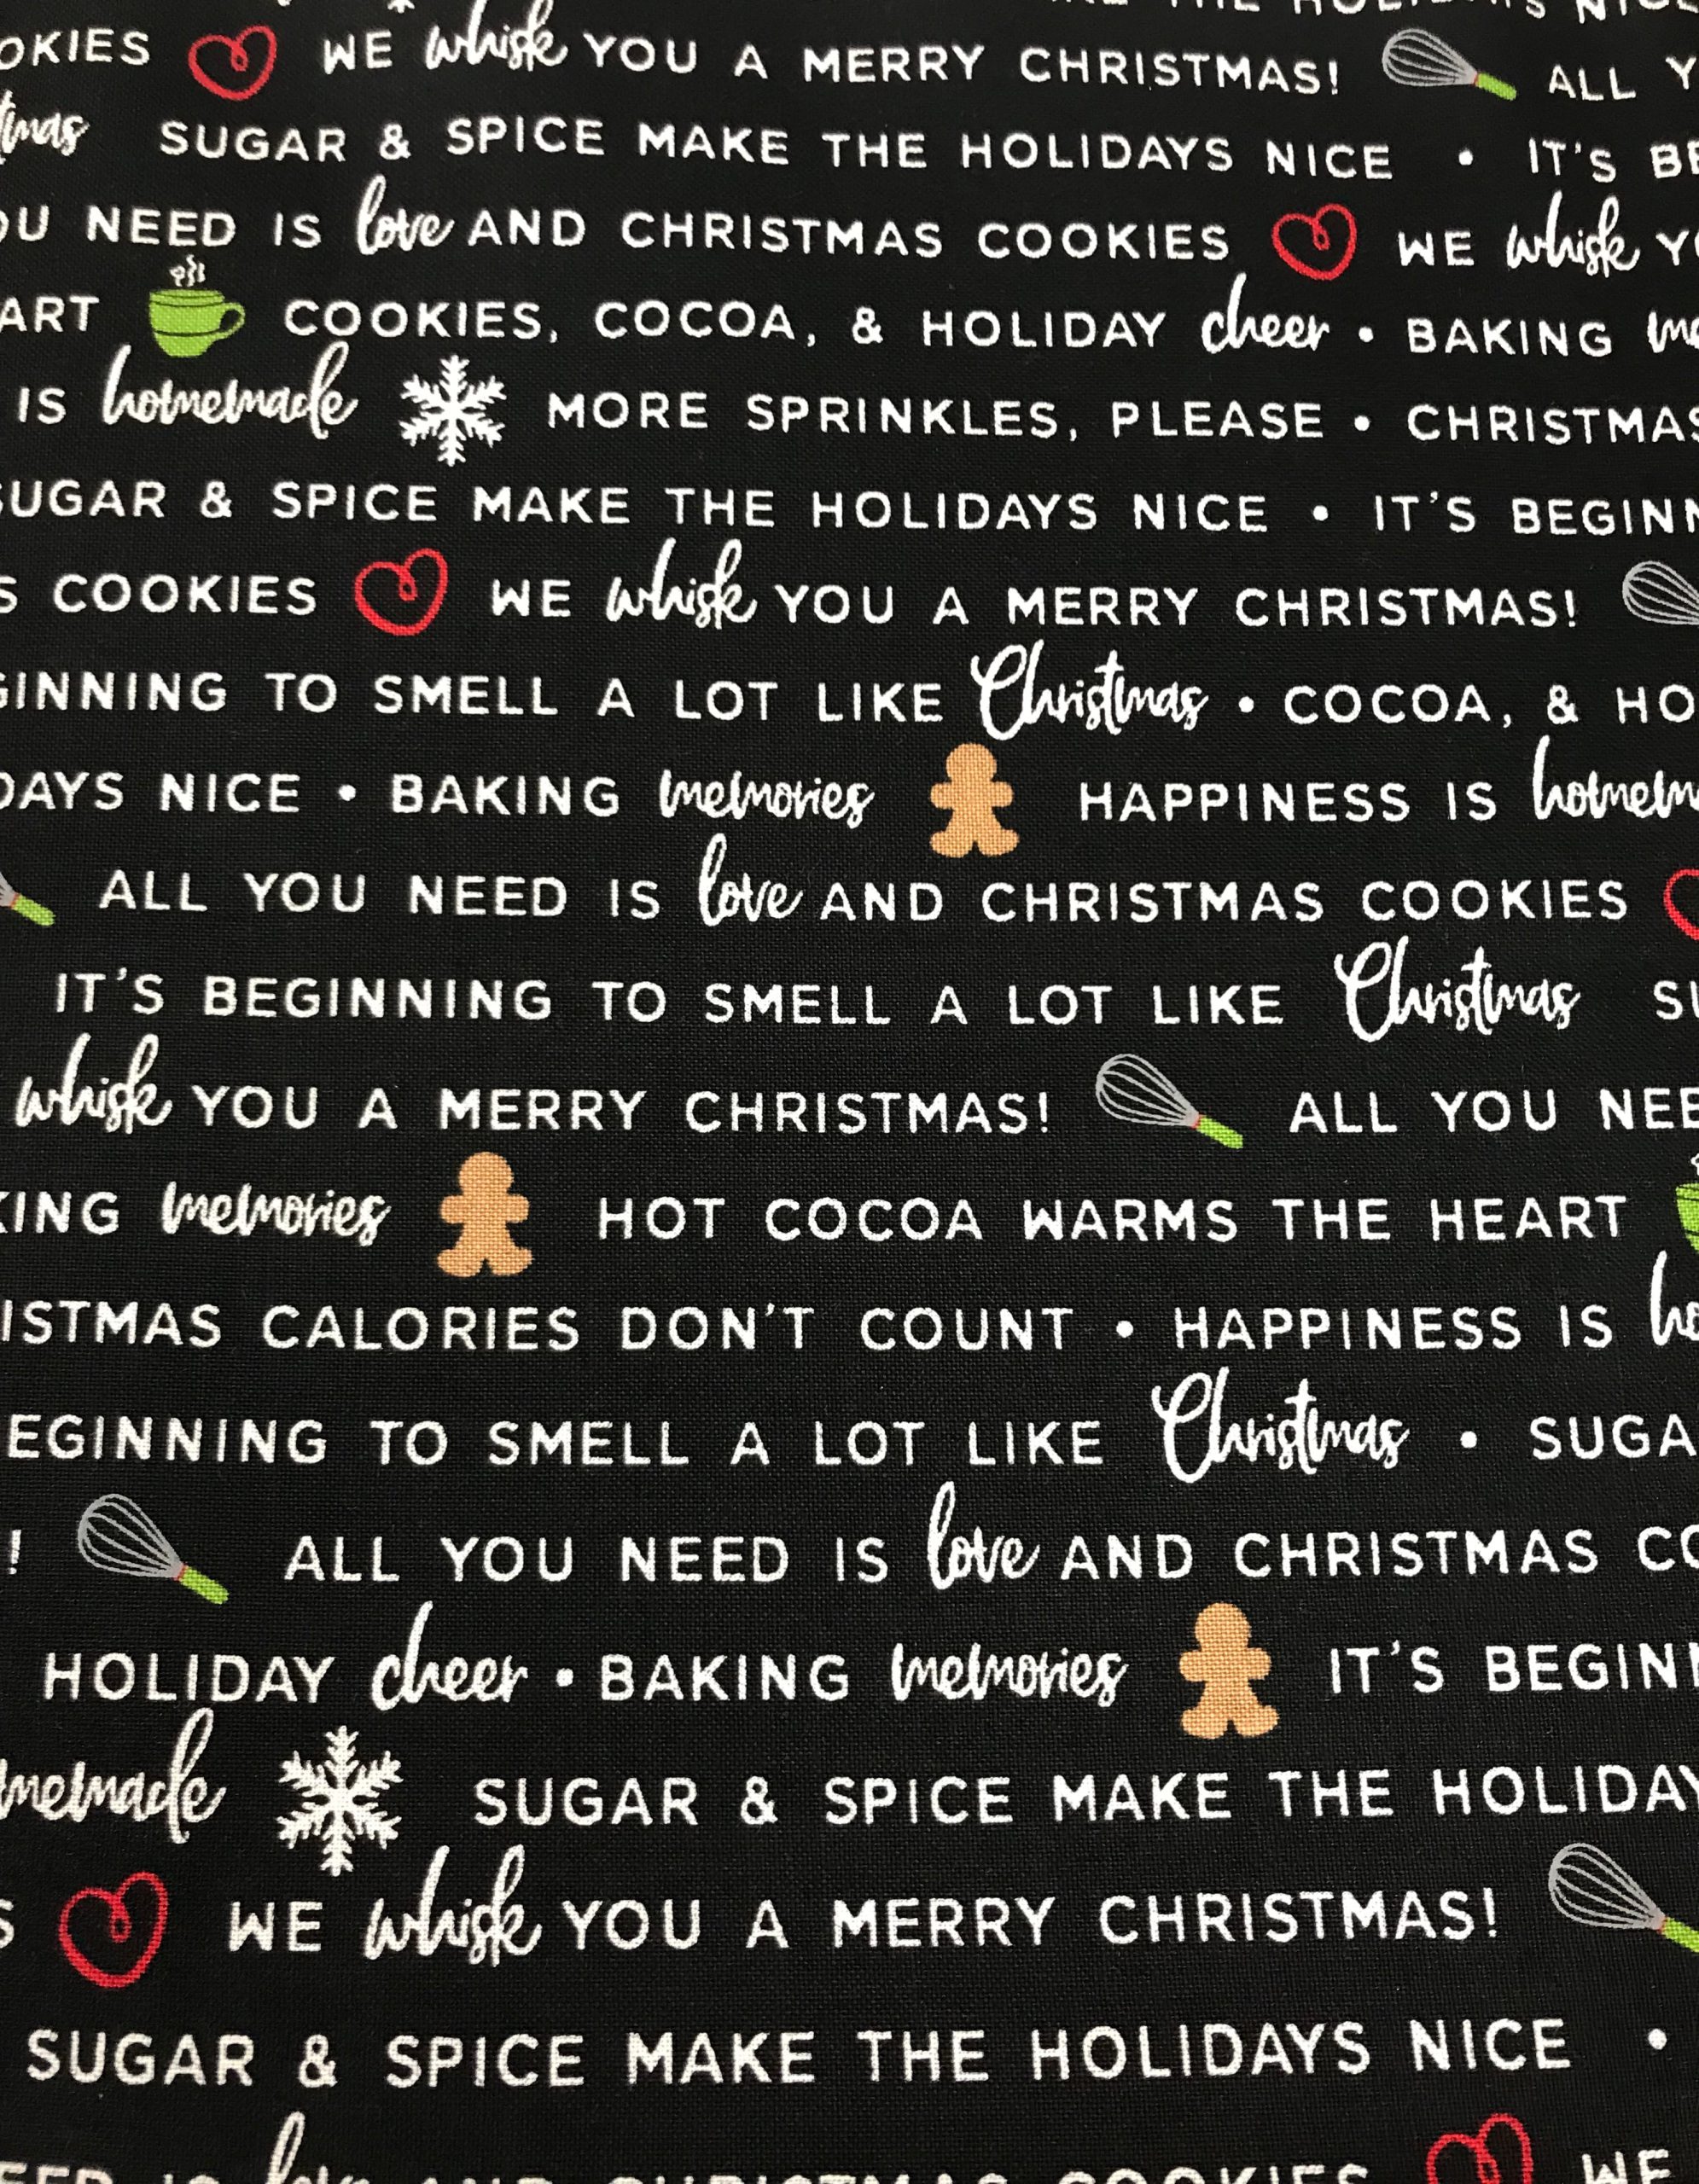 Kimberbell - We Whisk You a Merry Christmas - Baking Phrases